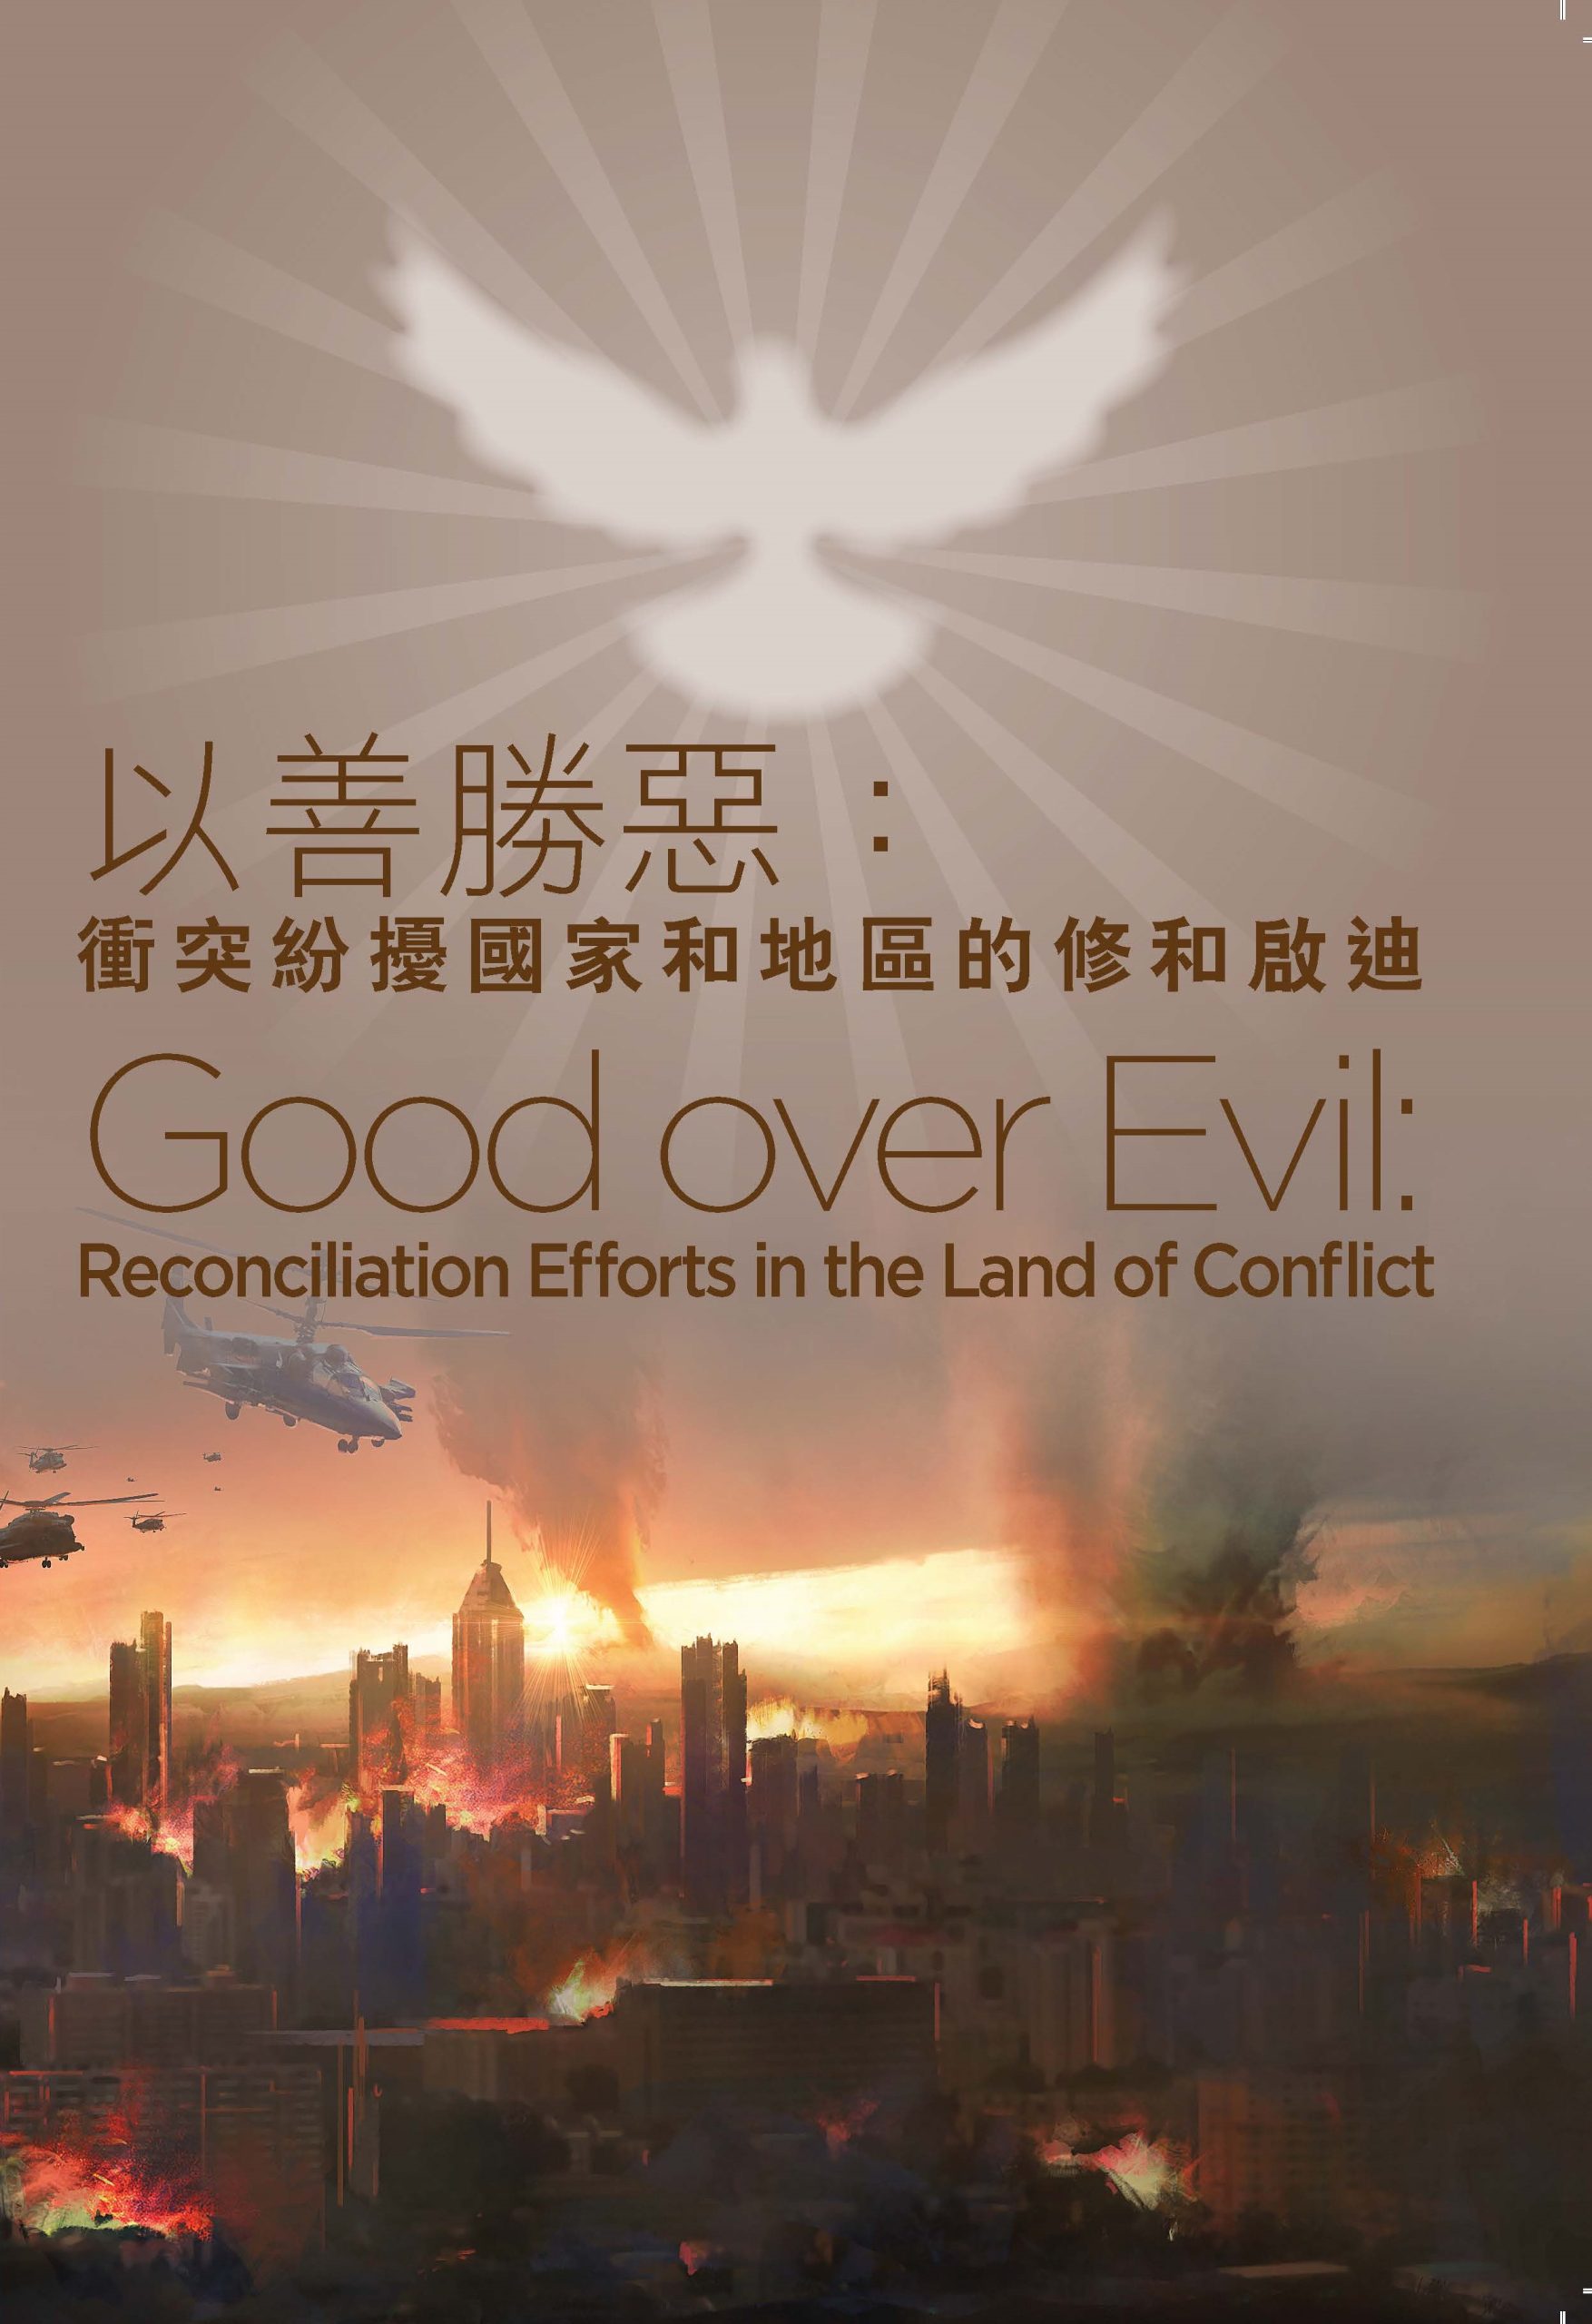 Good over Evil: Reconciliation Efforts in the Land of Conflict